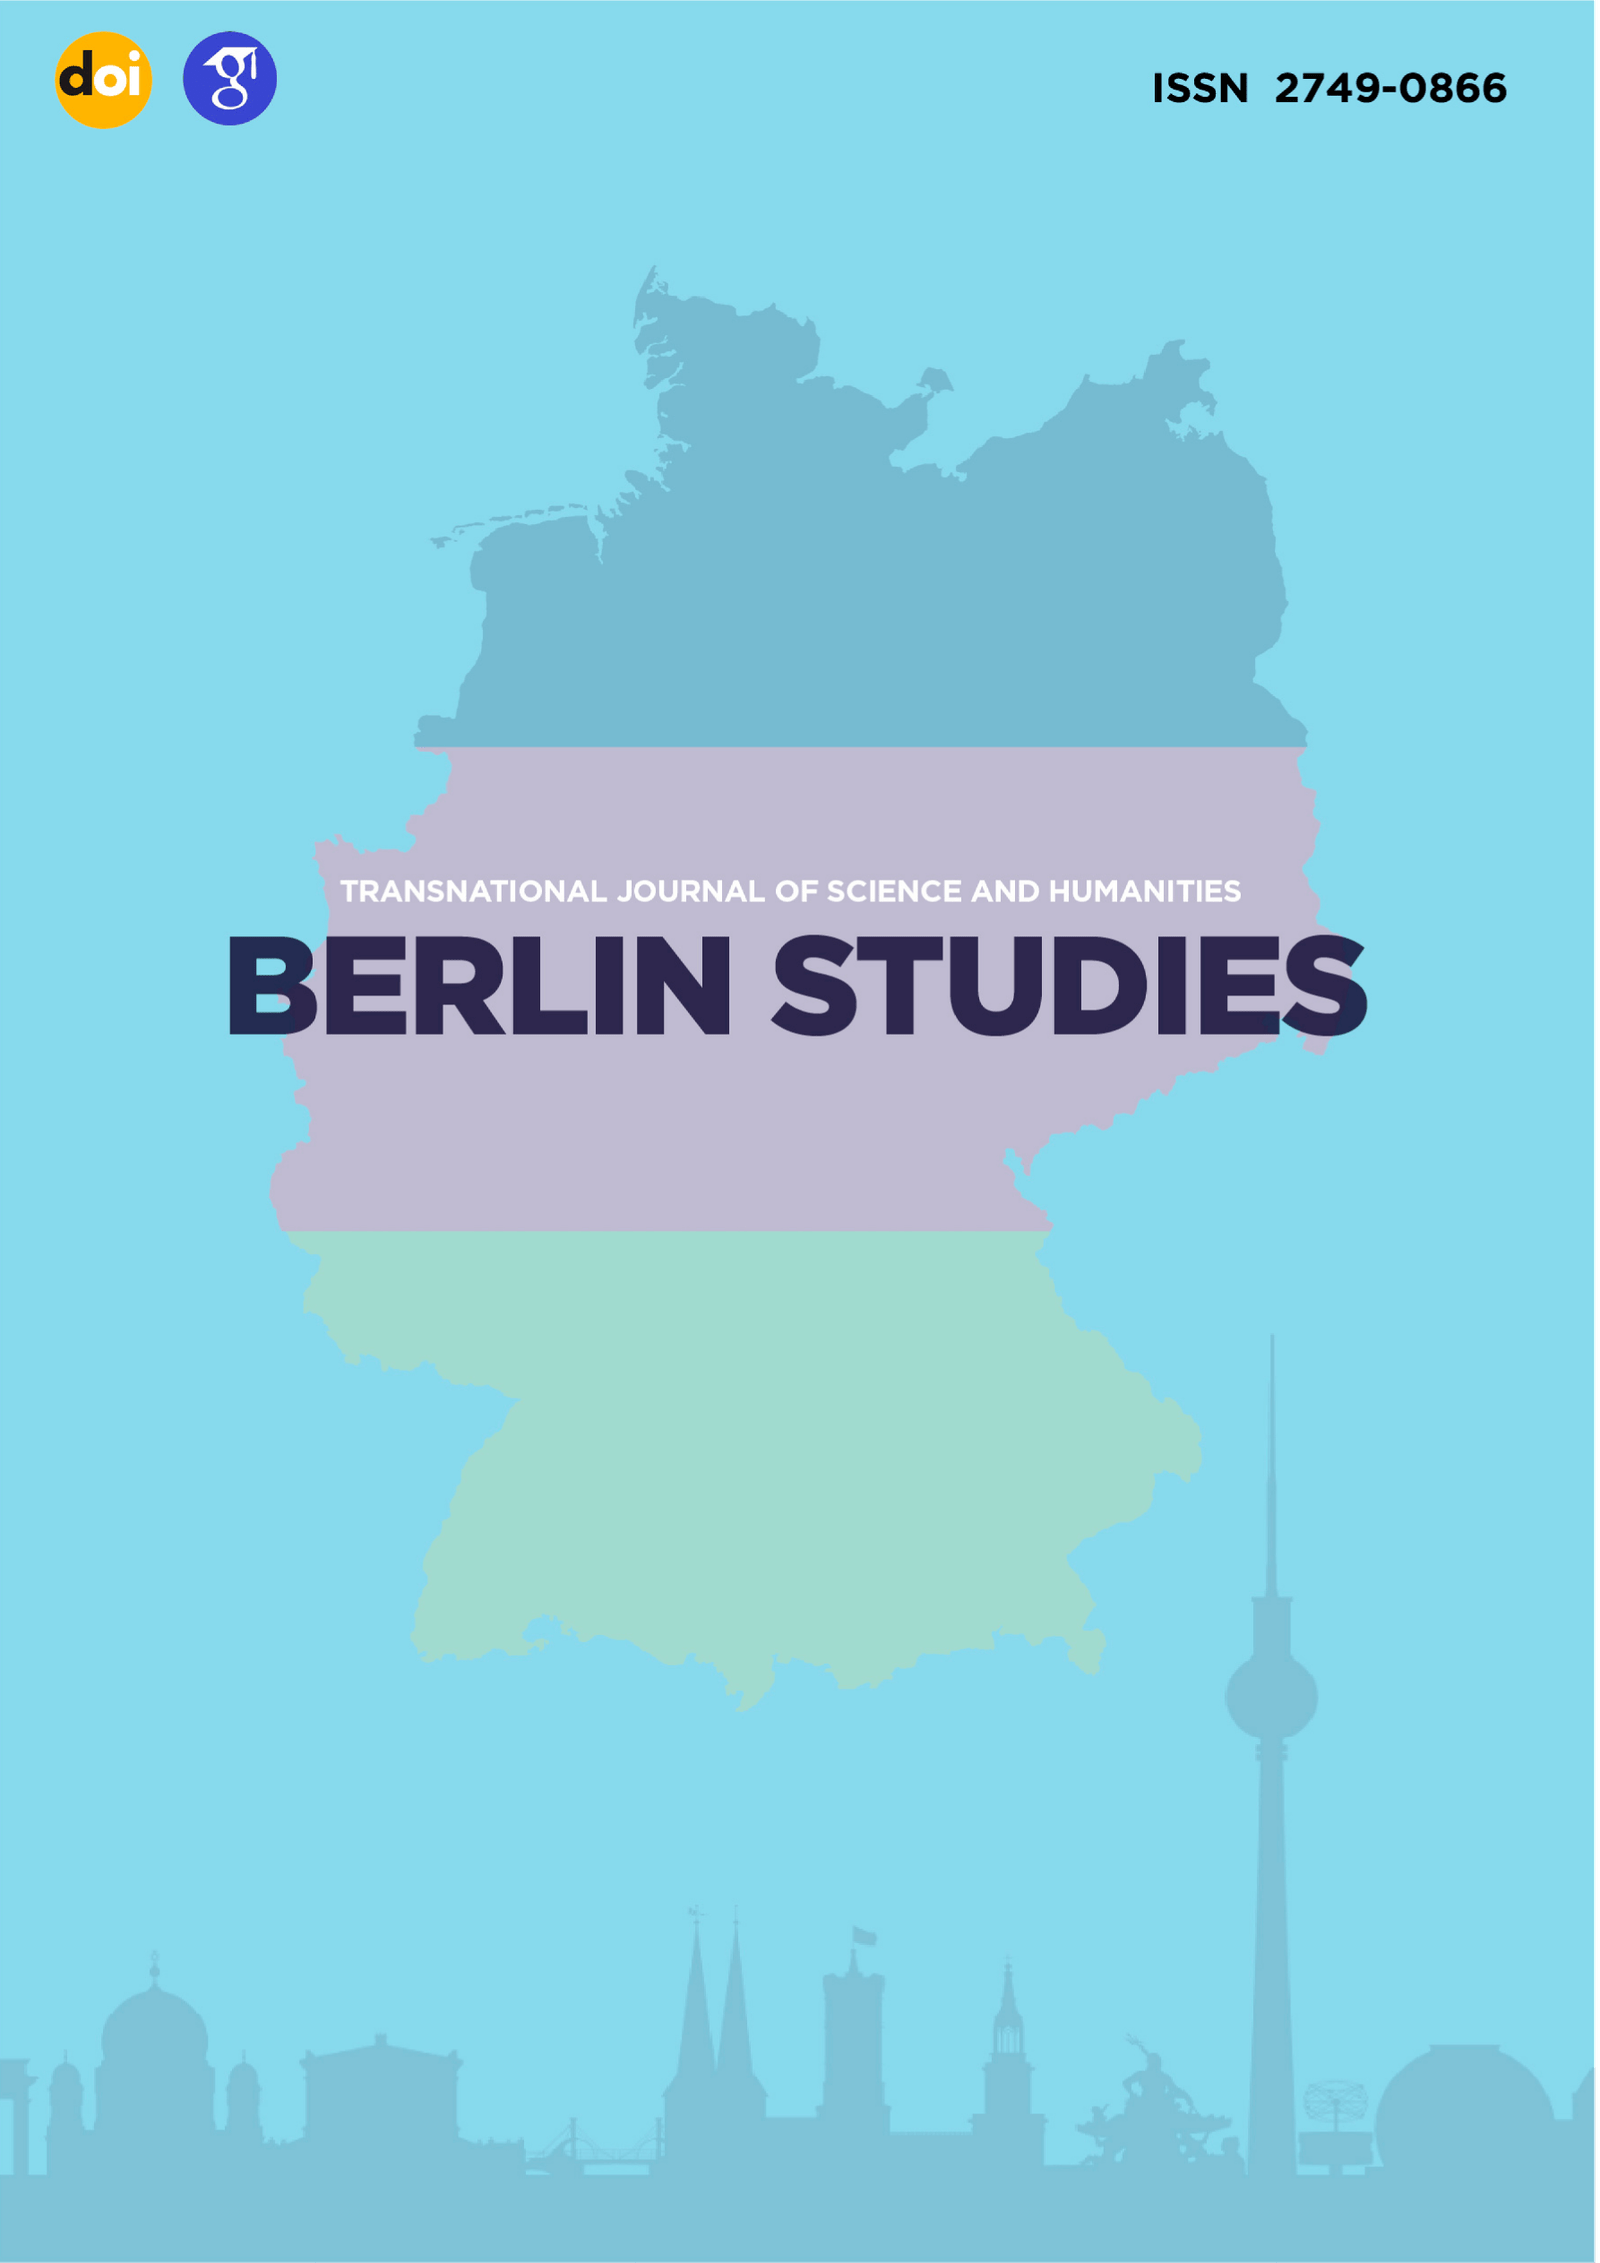 					View Vol. 3 No. 1.6 Philological sciences (2023): Berlin Studies Transnational Journal of Science and Humanities
				